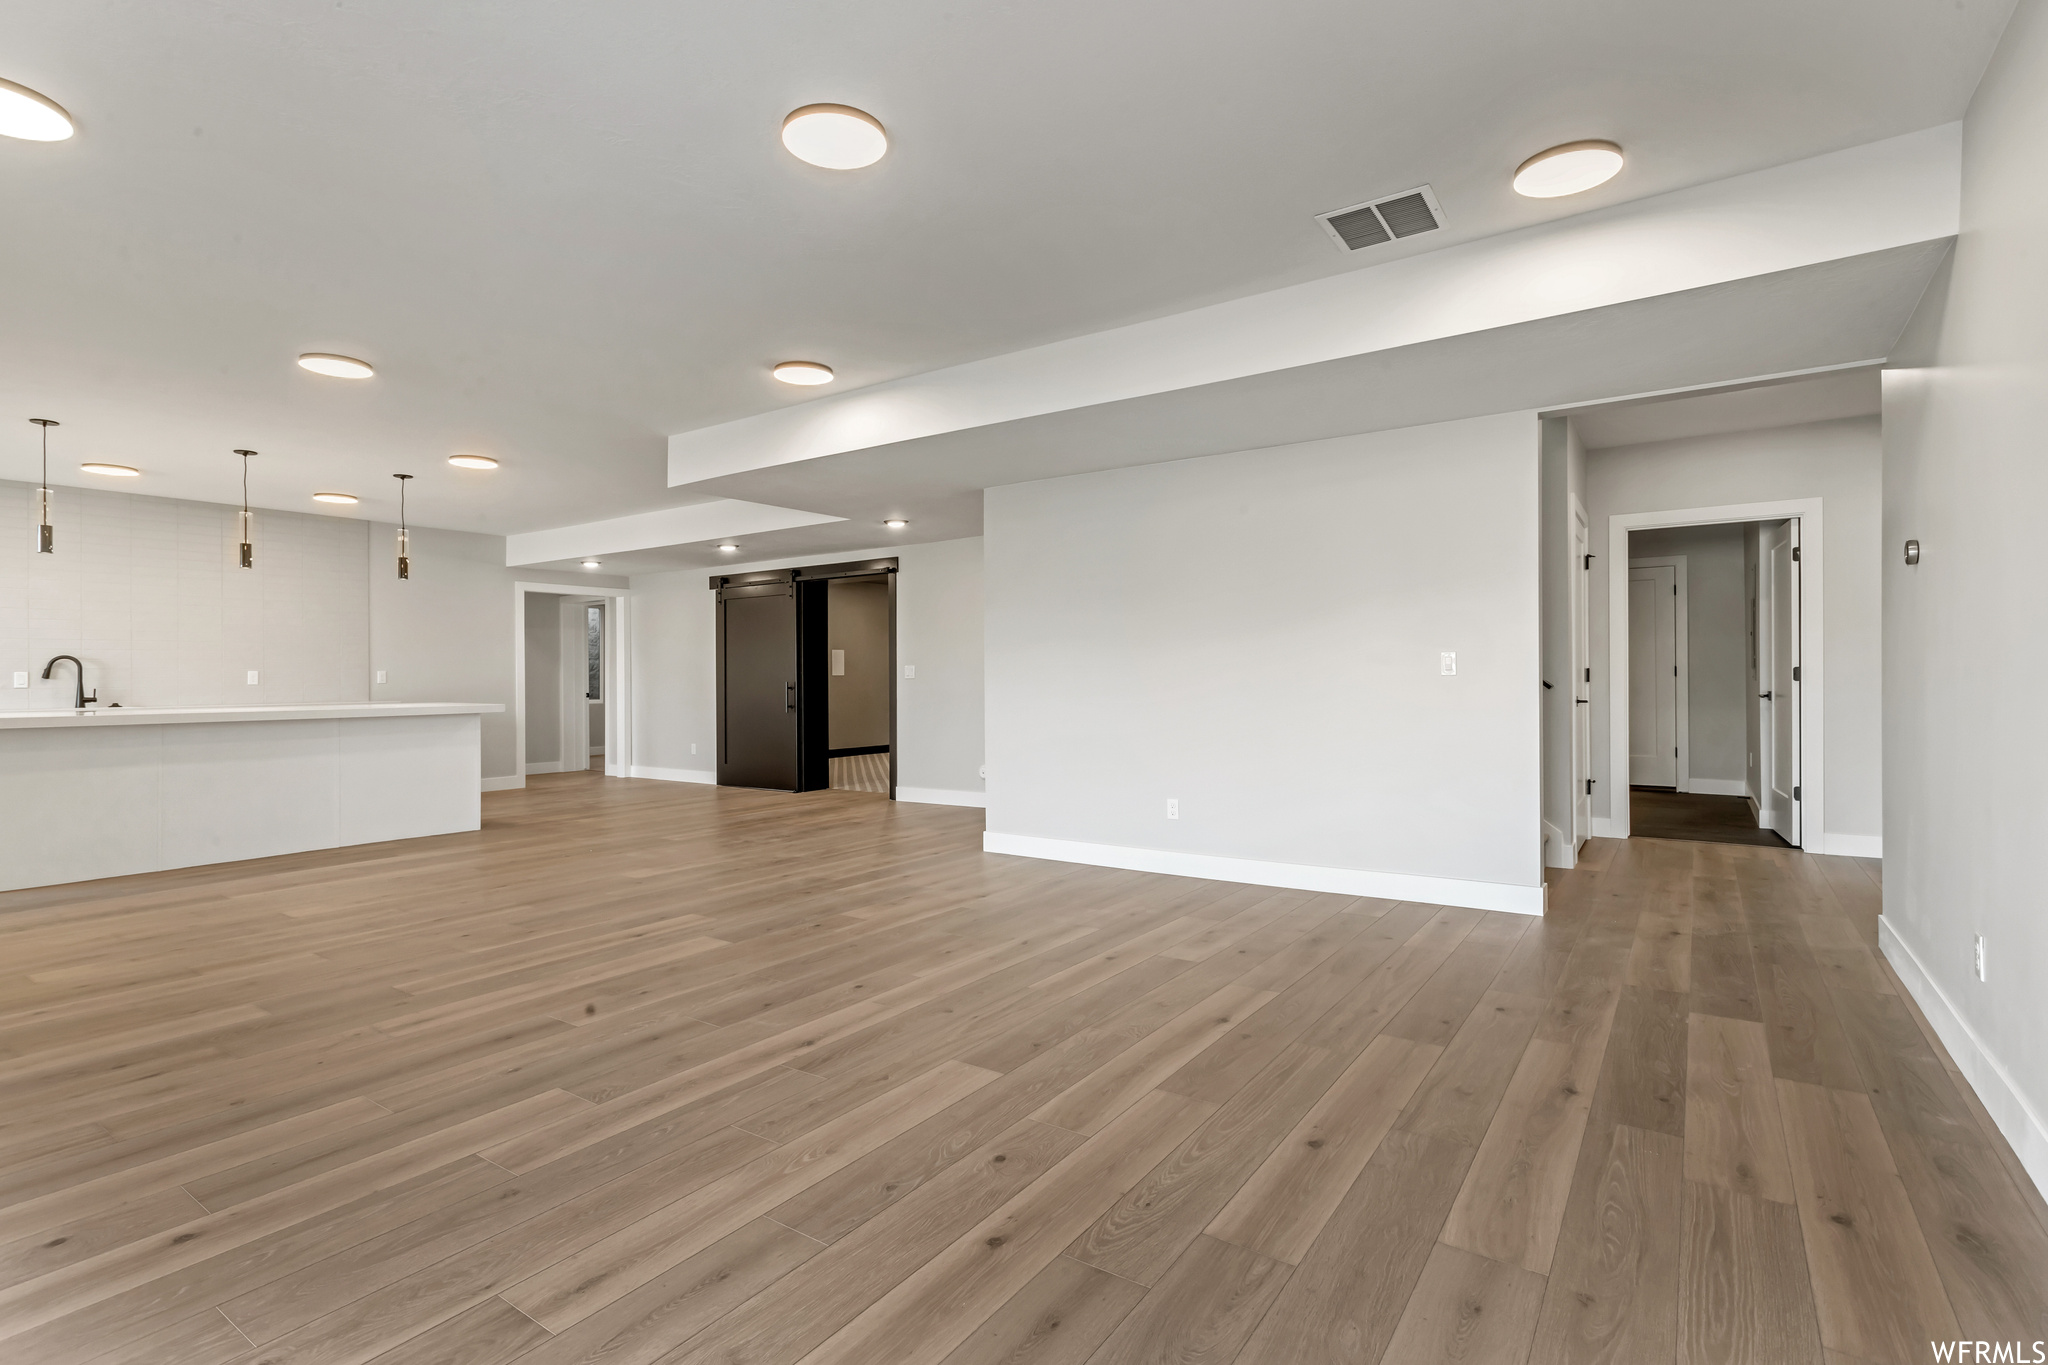 Beautiful LVP floors will last in this family space